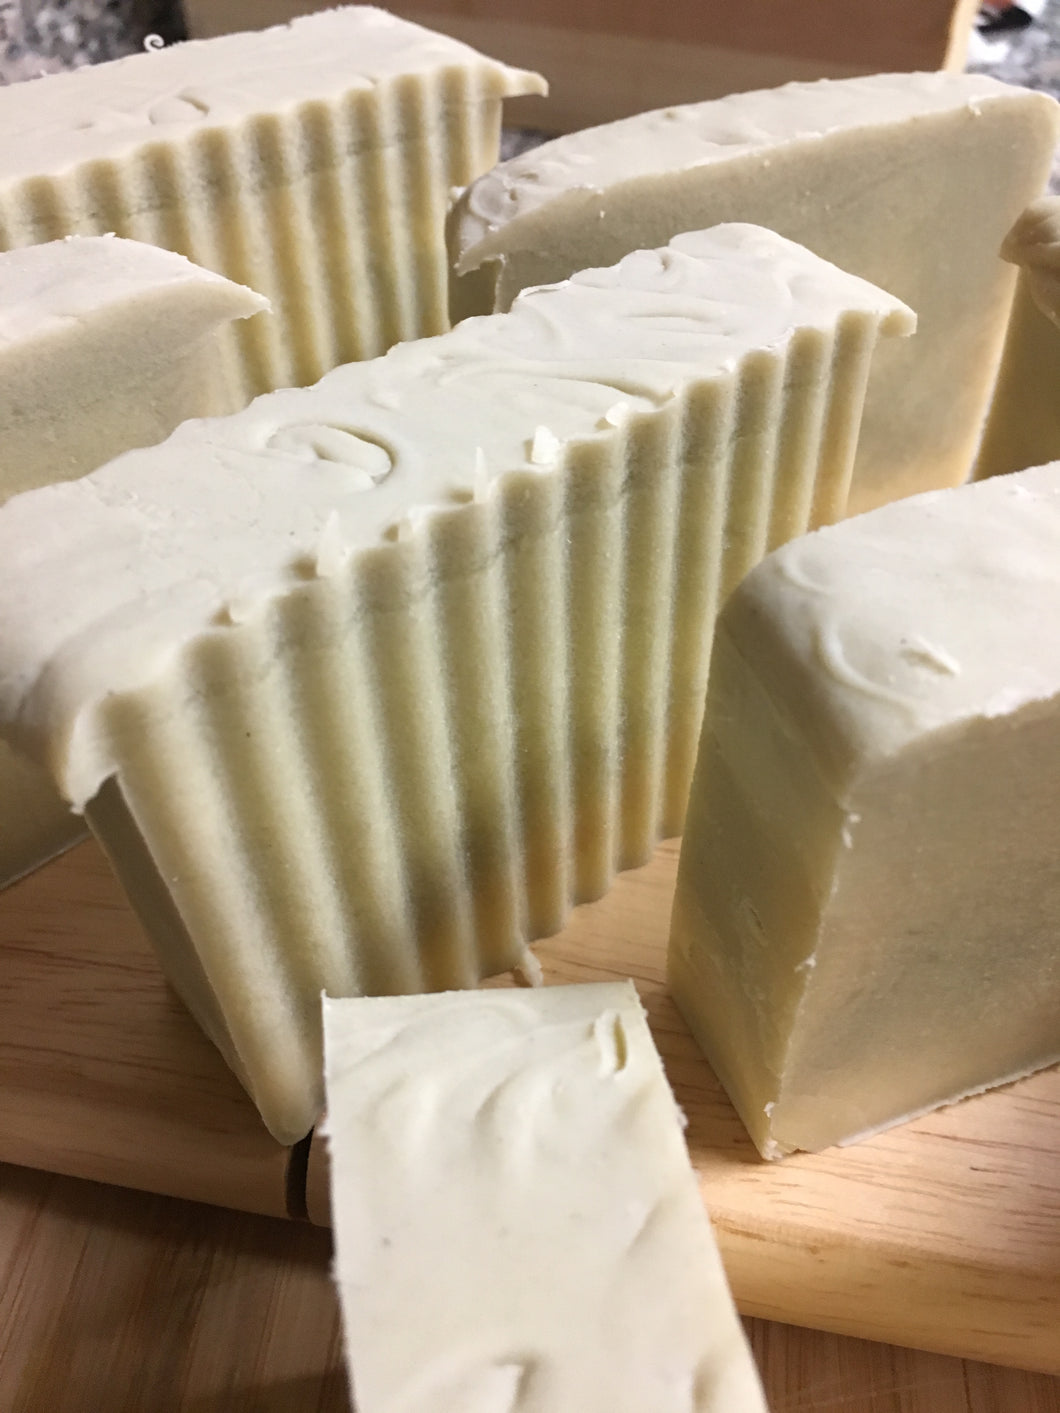 Clary Sage Mint with Aloe Soap - Scentsbyeme Bath & Body Care